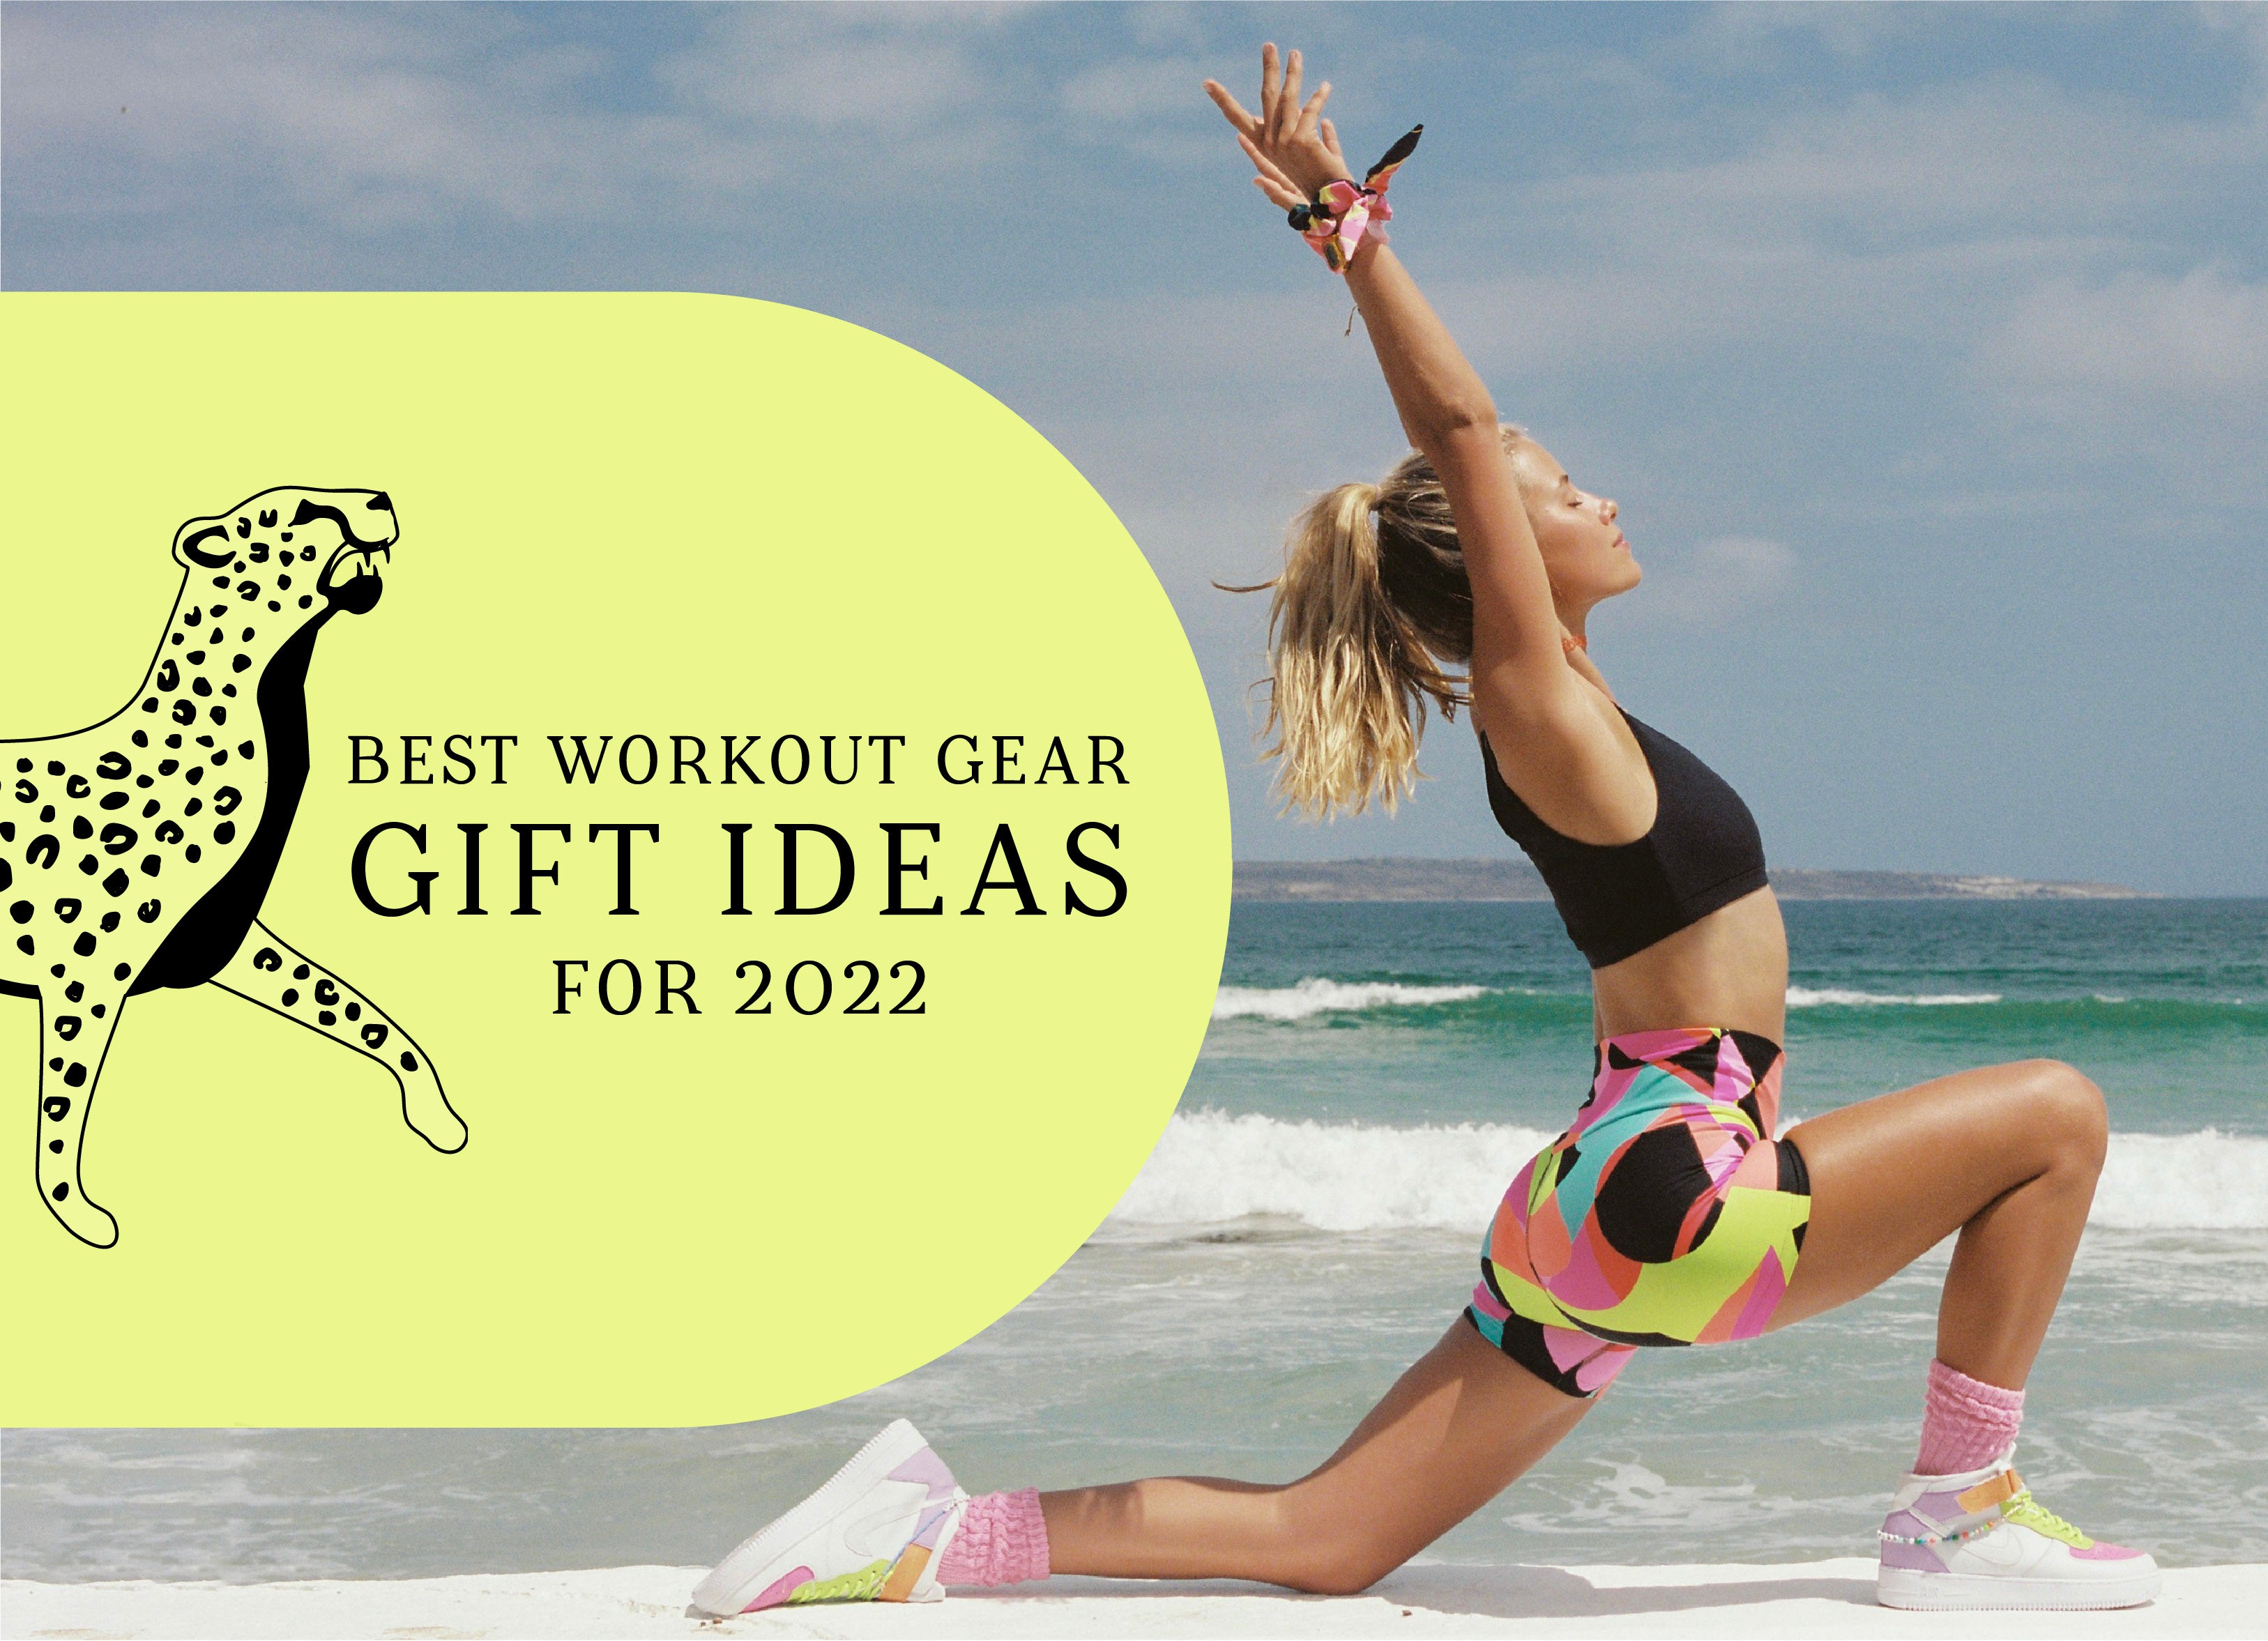 BEST WORKOUT GEAR GIFT IDEAS FOR 2022